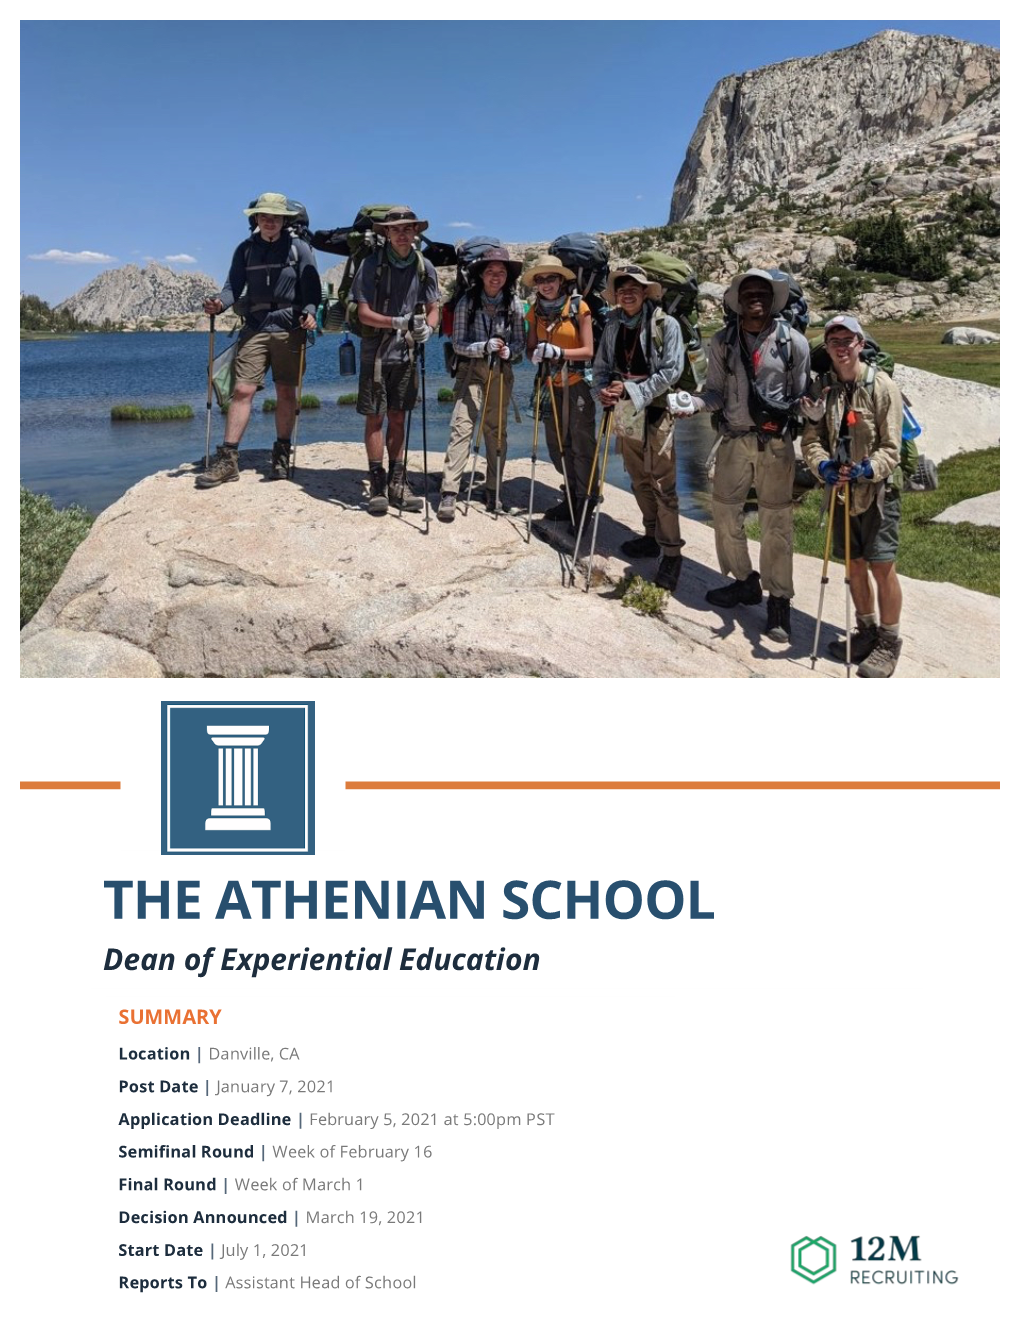 Athenian Dean of Experiential Education